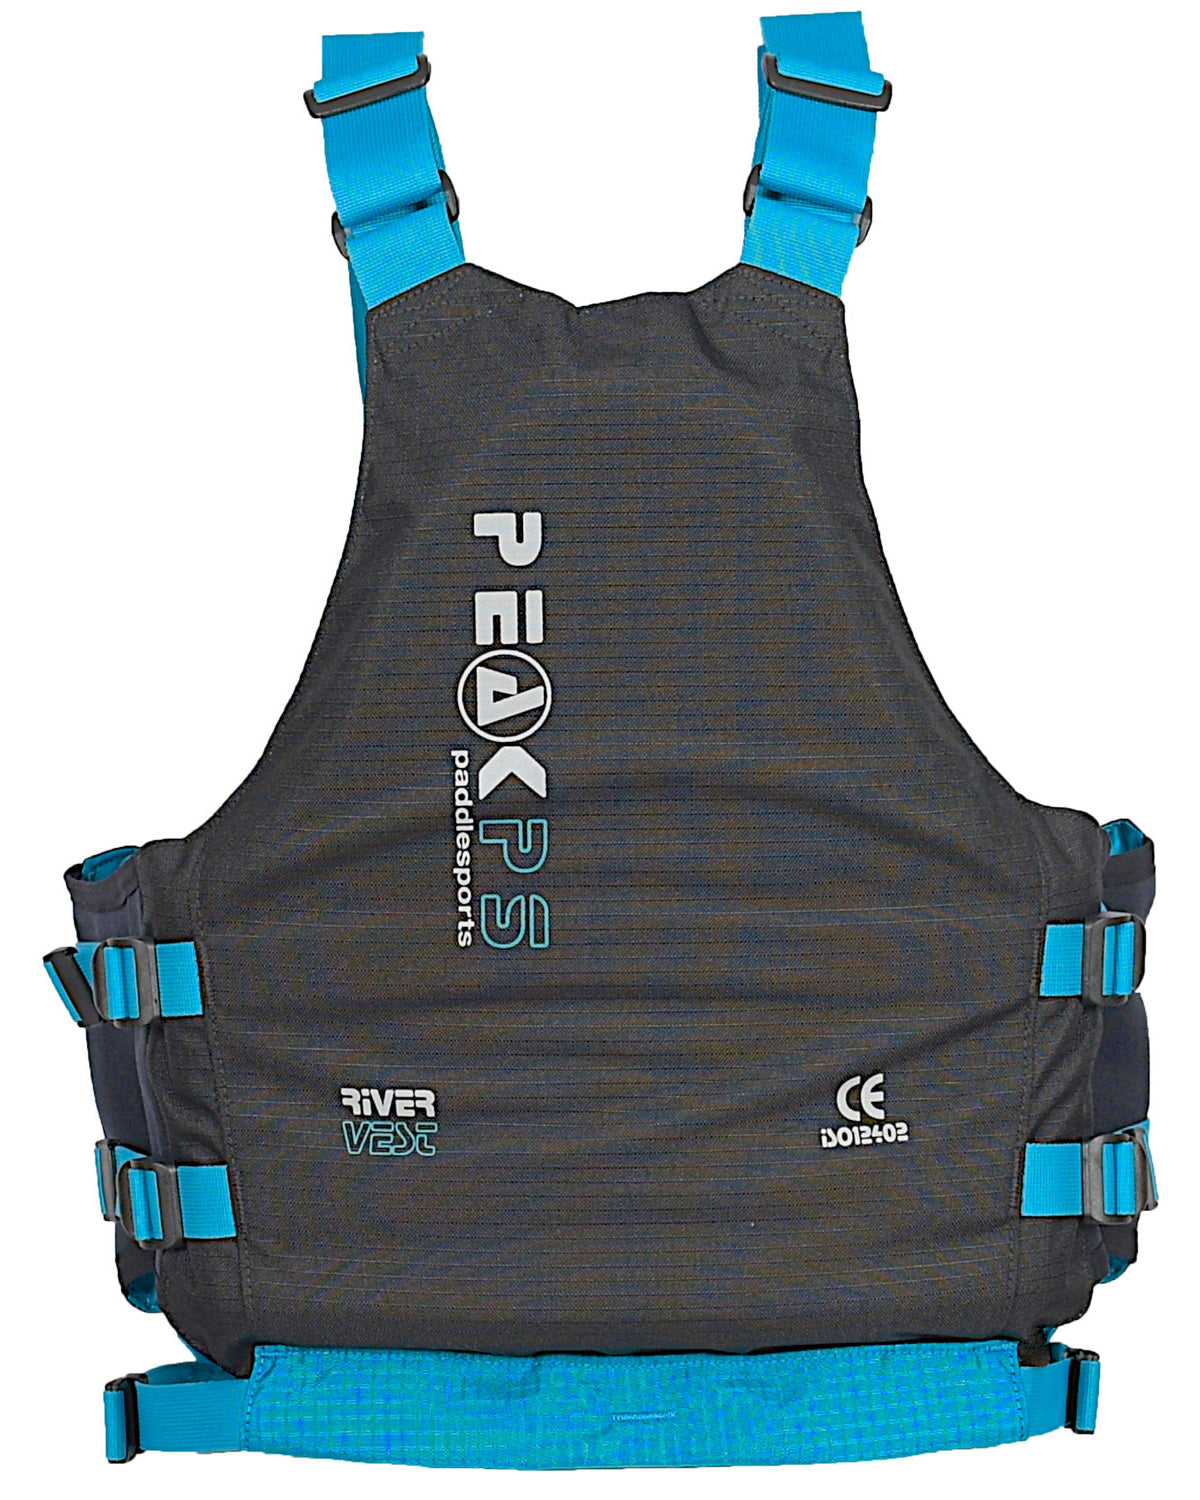 The back of the Black Peak PS River vest Whitewater buoyancy aid